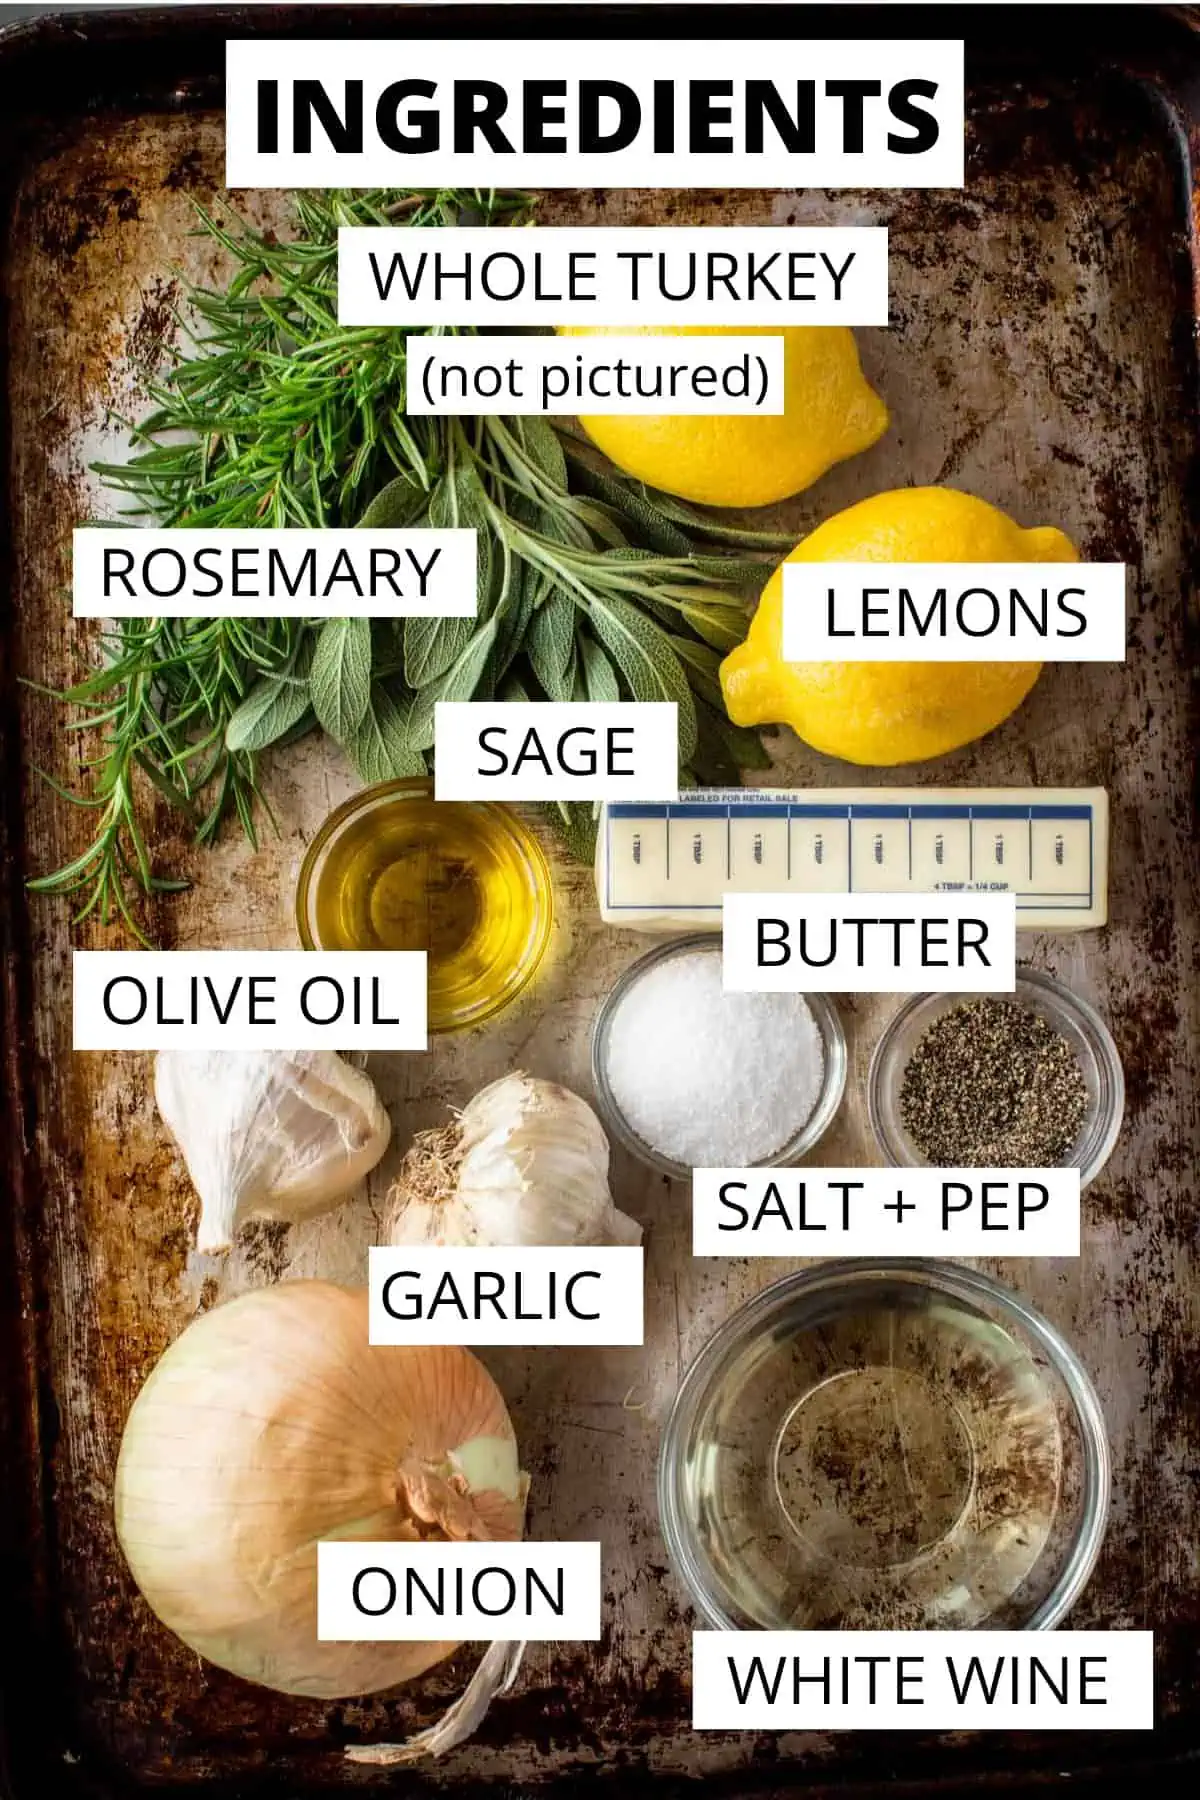 A bird's eye view of Italian style roasted turkey ingredients, labeled.